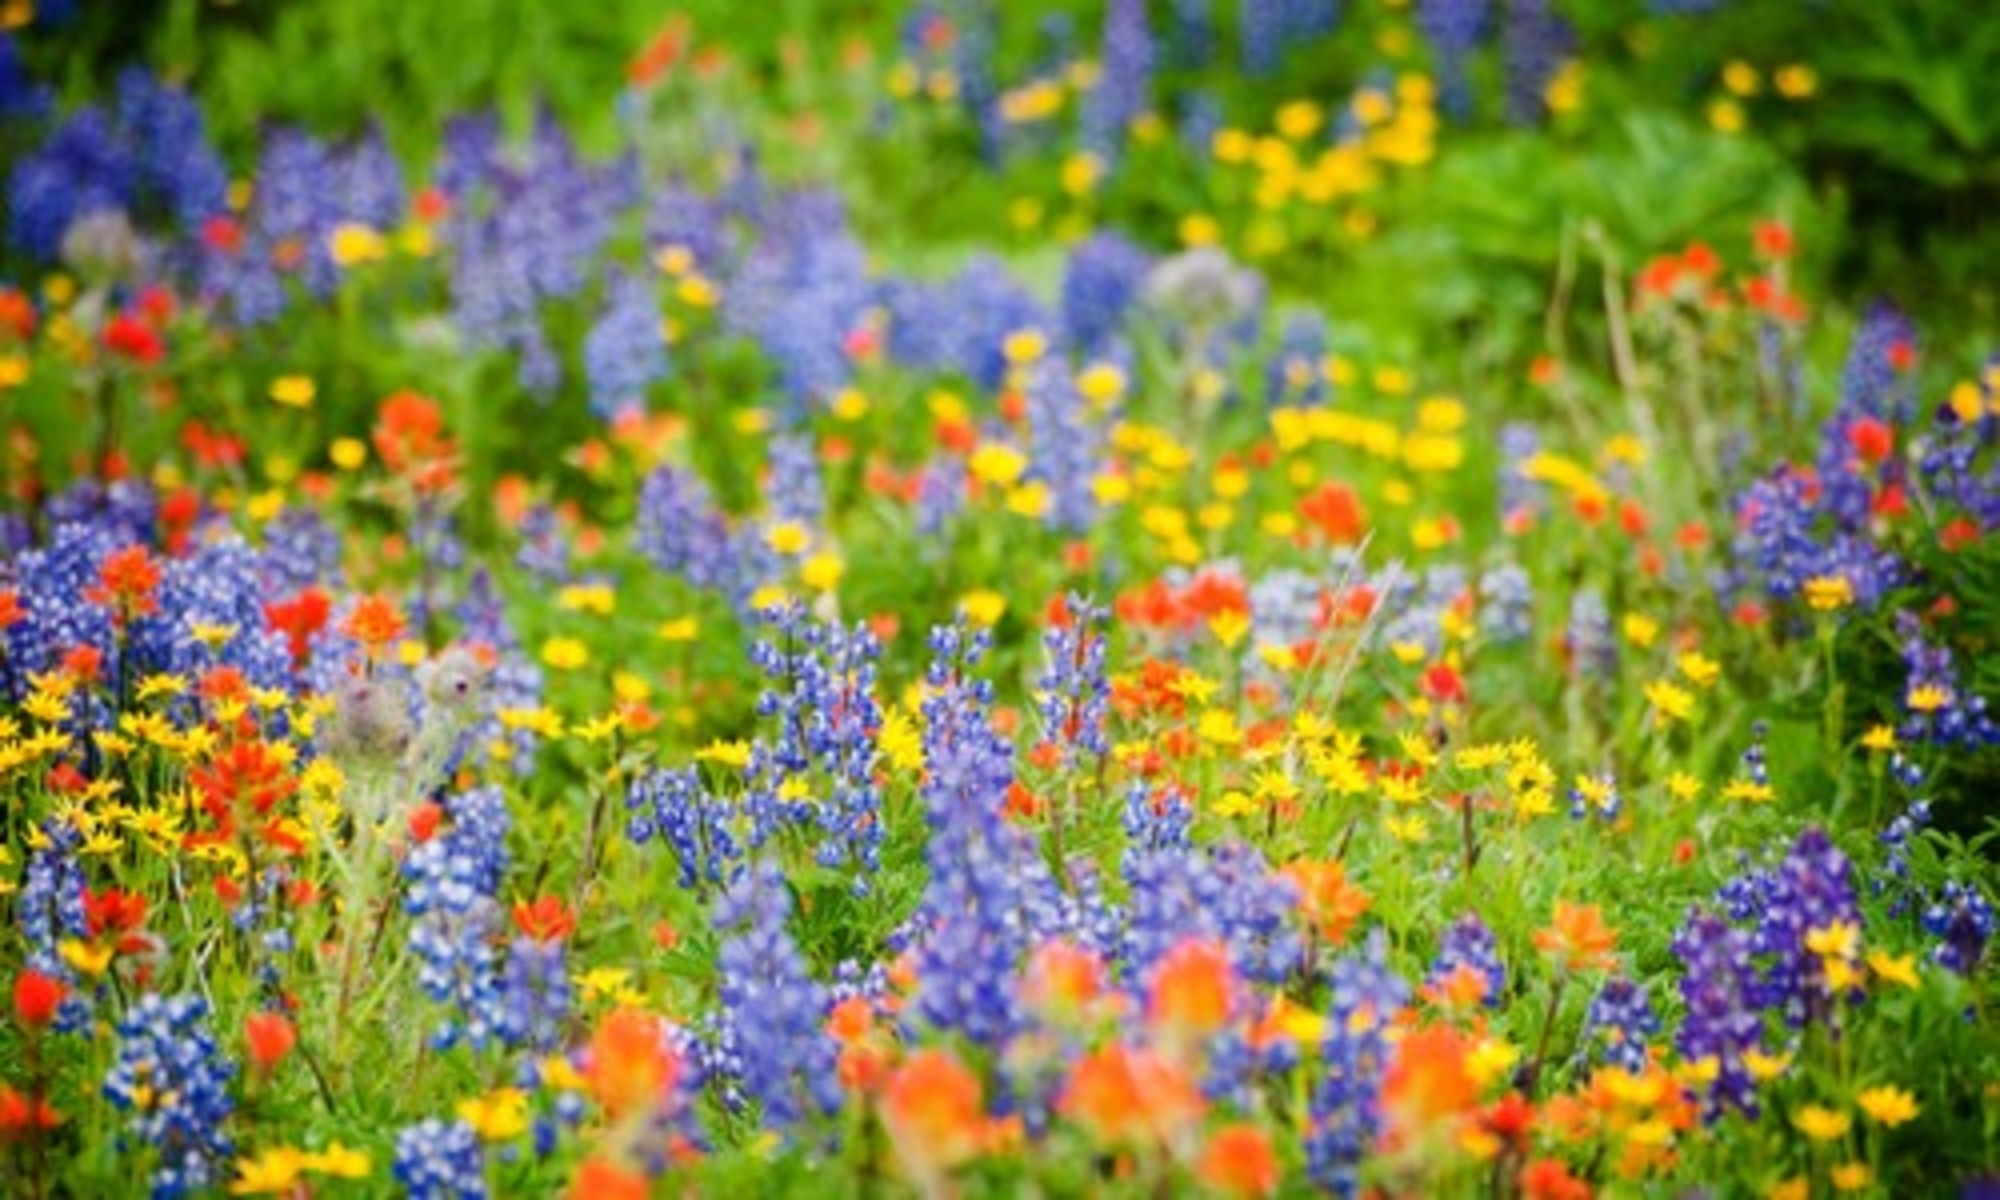 9 Tips for Wildflower Hunting - EcoWatch